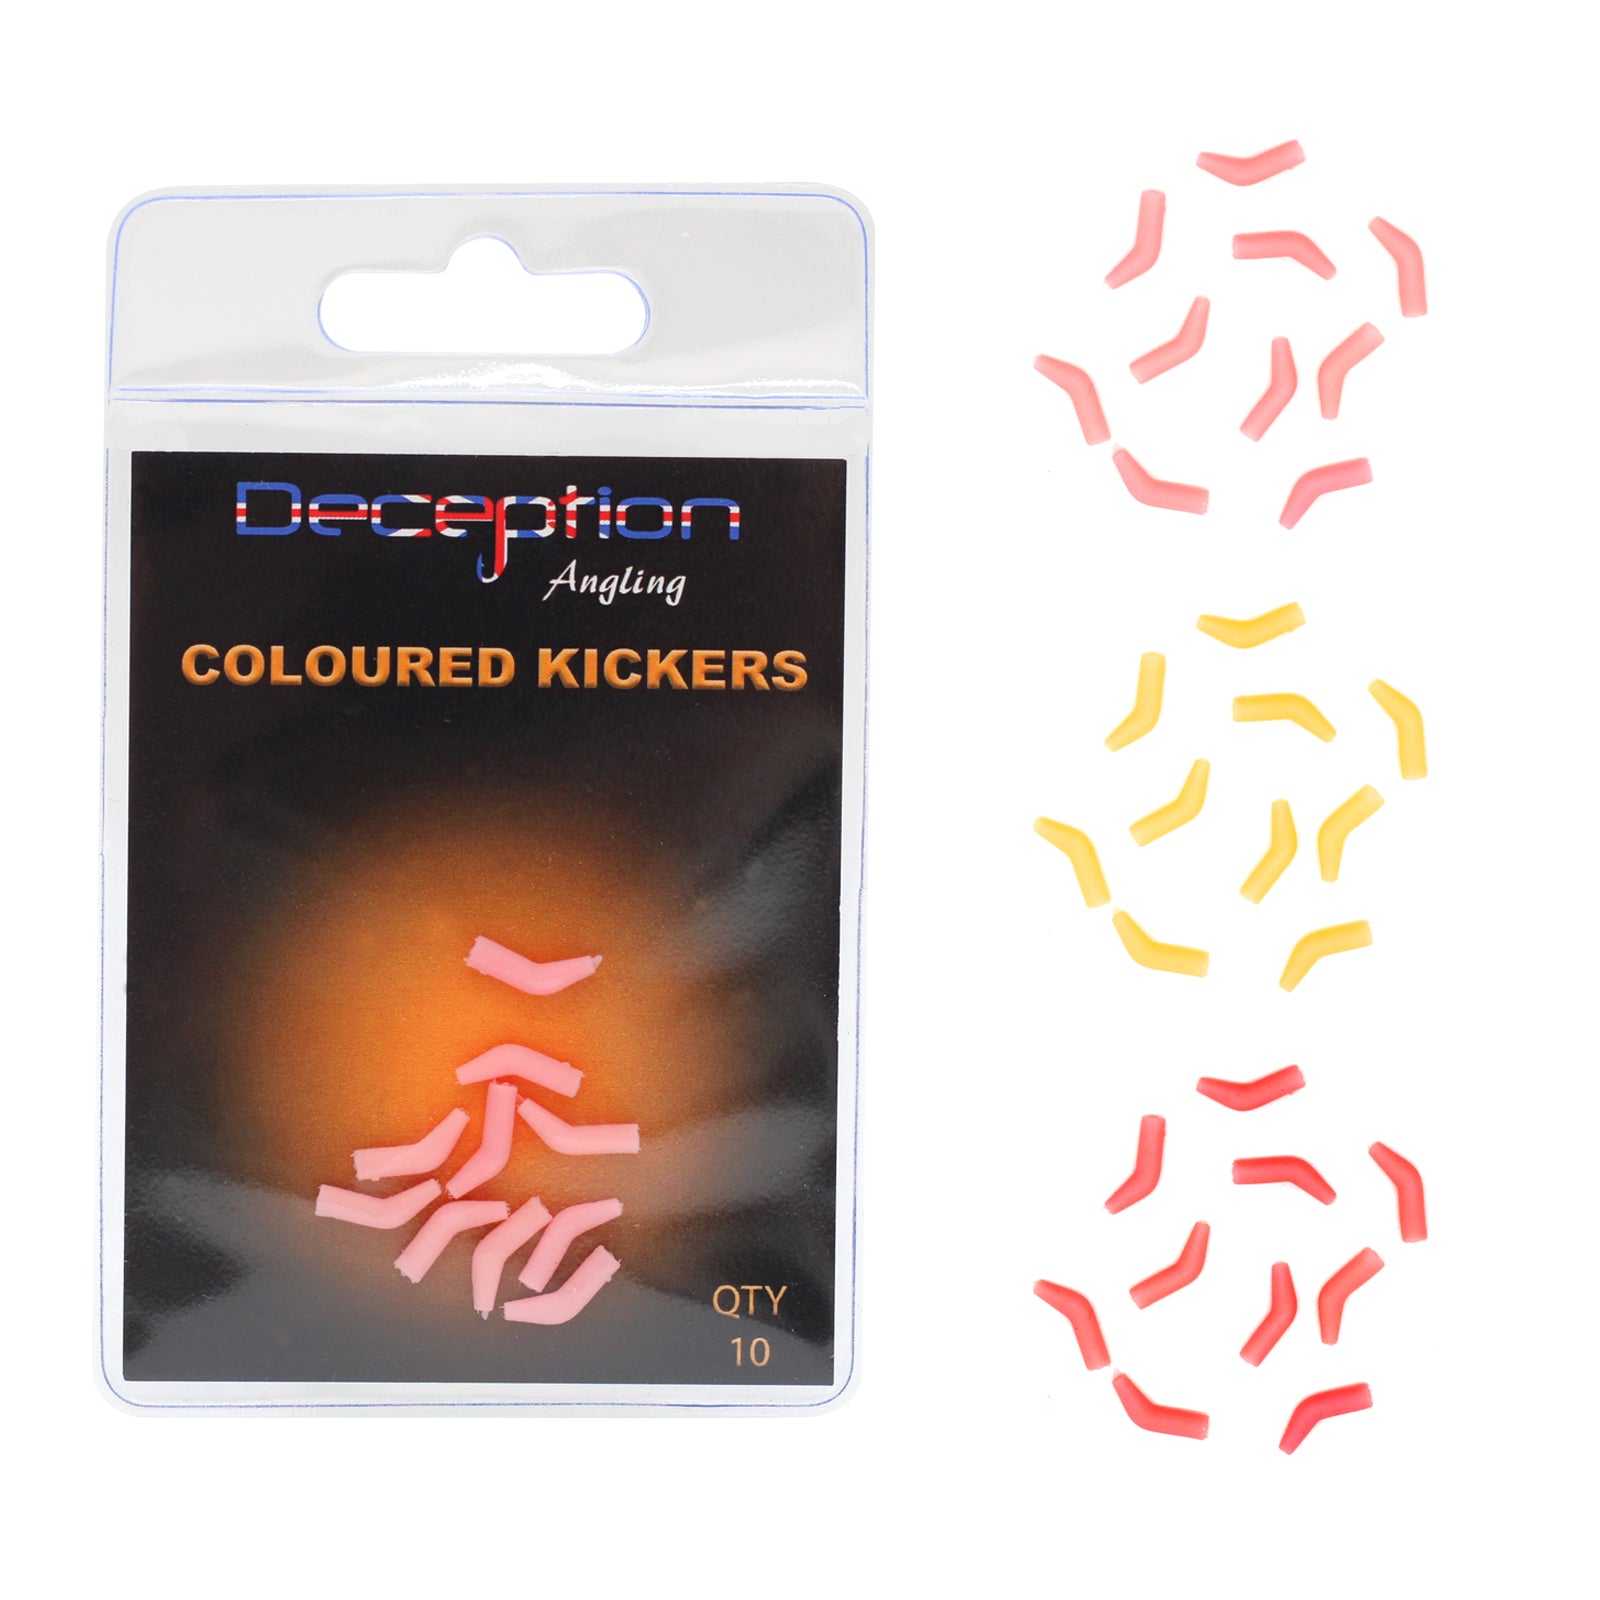 Deception Angling Coloured Kickers for Fishing in 3 Colours